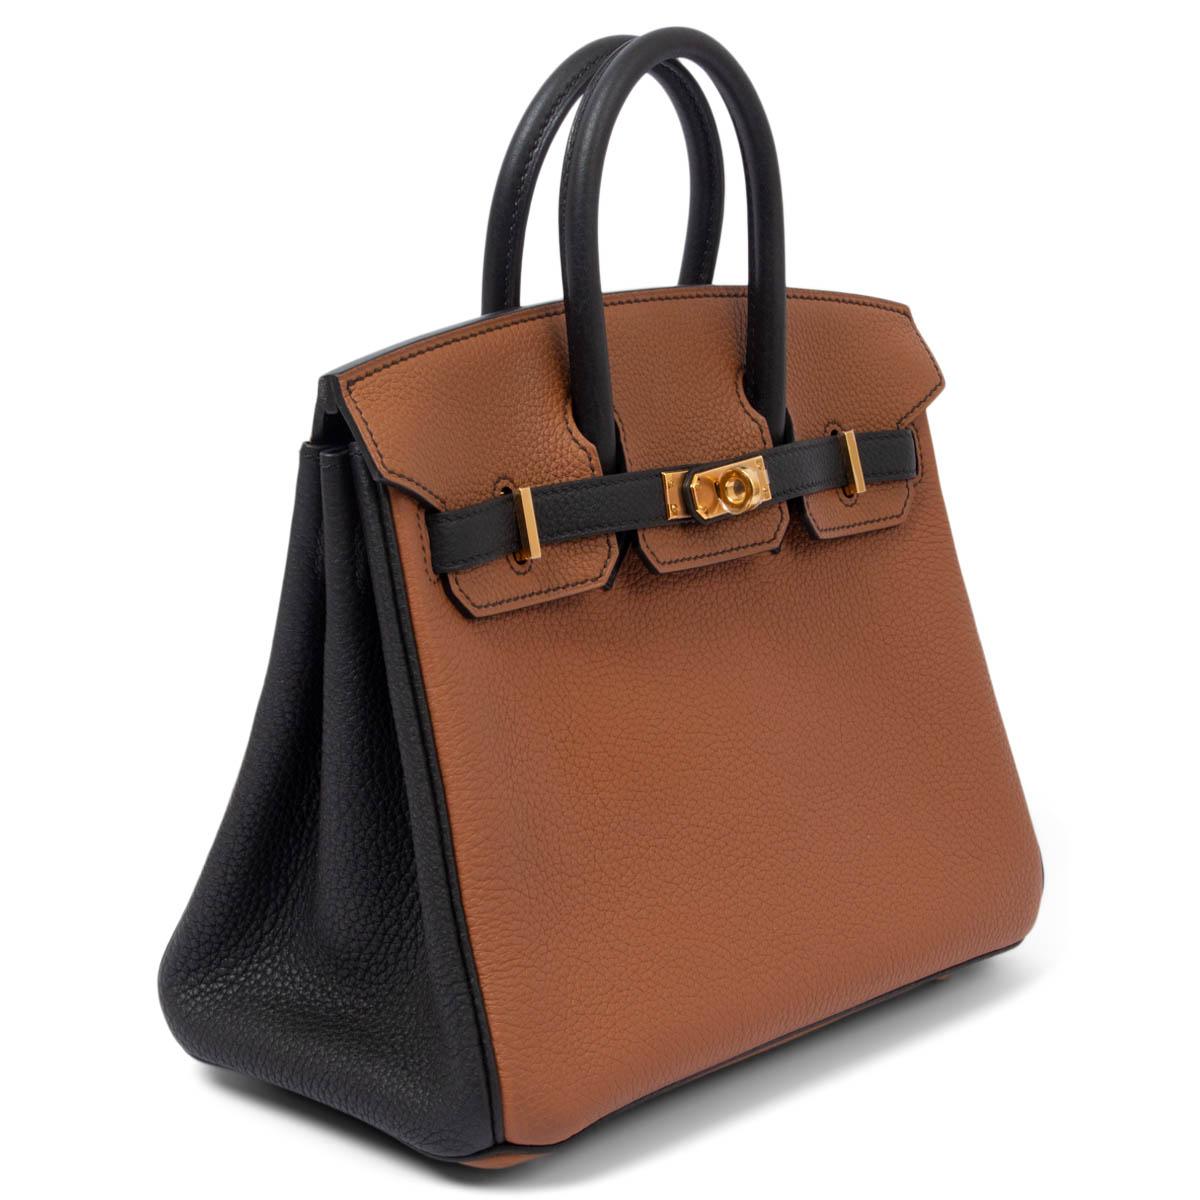 100% authentic Hermès Birkin 25 HSS bag in bi-color Gold (camel) and Noir (black) Veau Togo leather with gold-plated hardware. Lined in Noir Chevre (goat skin) with an open pocket against the front and zipper pocket against the back. Has been